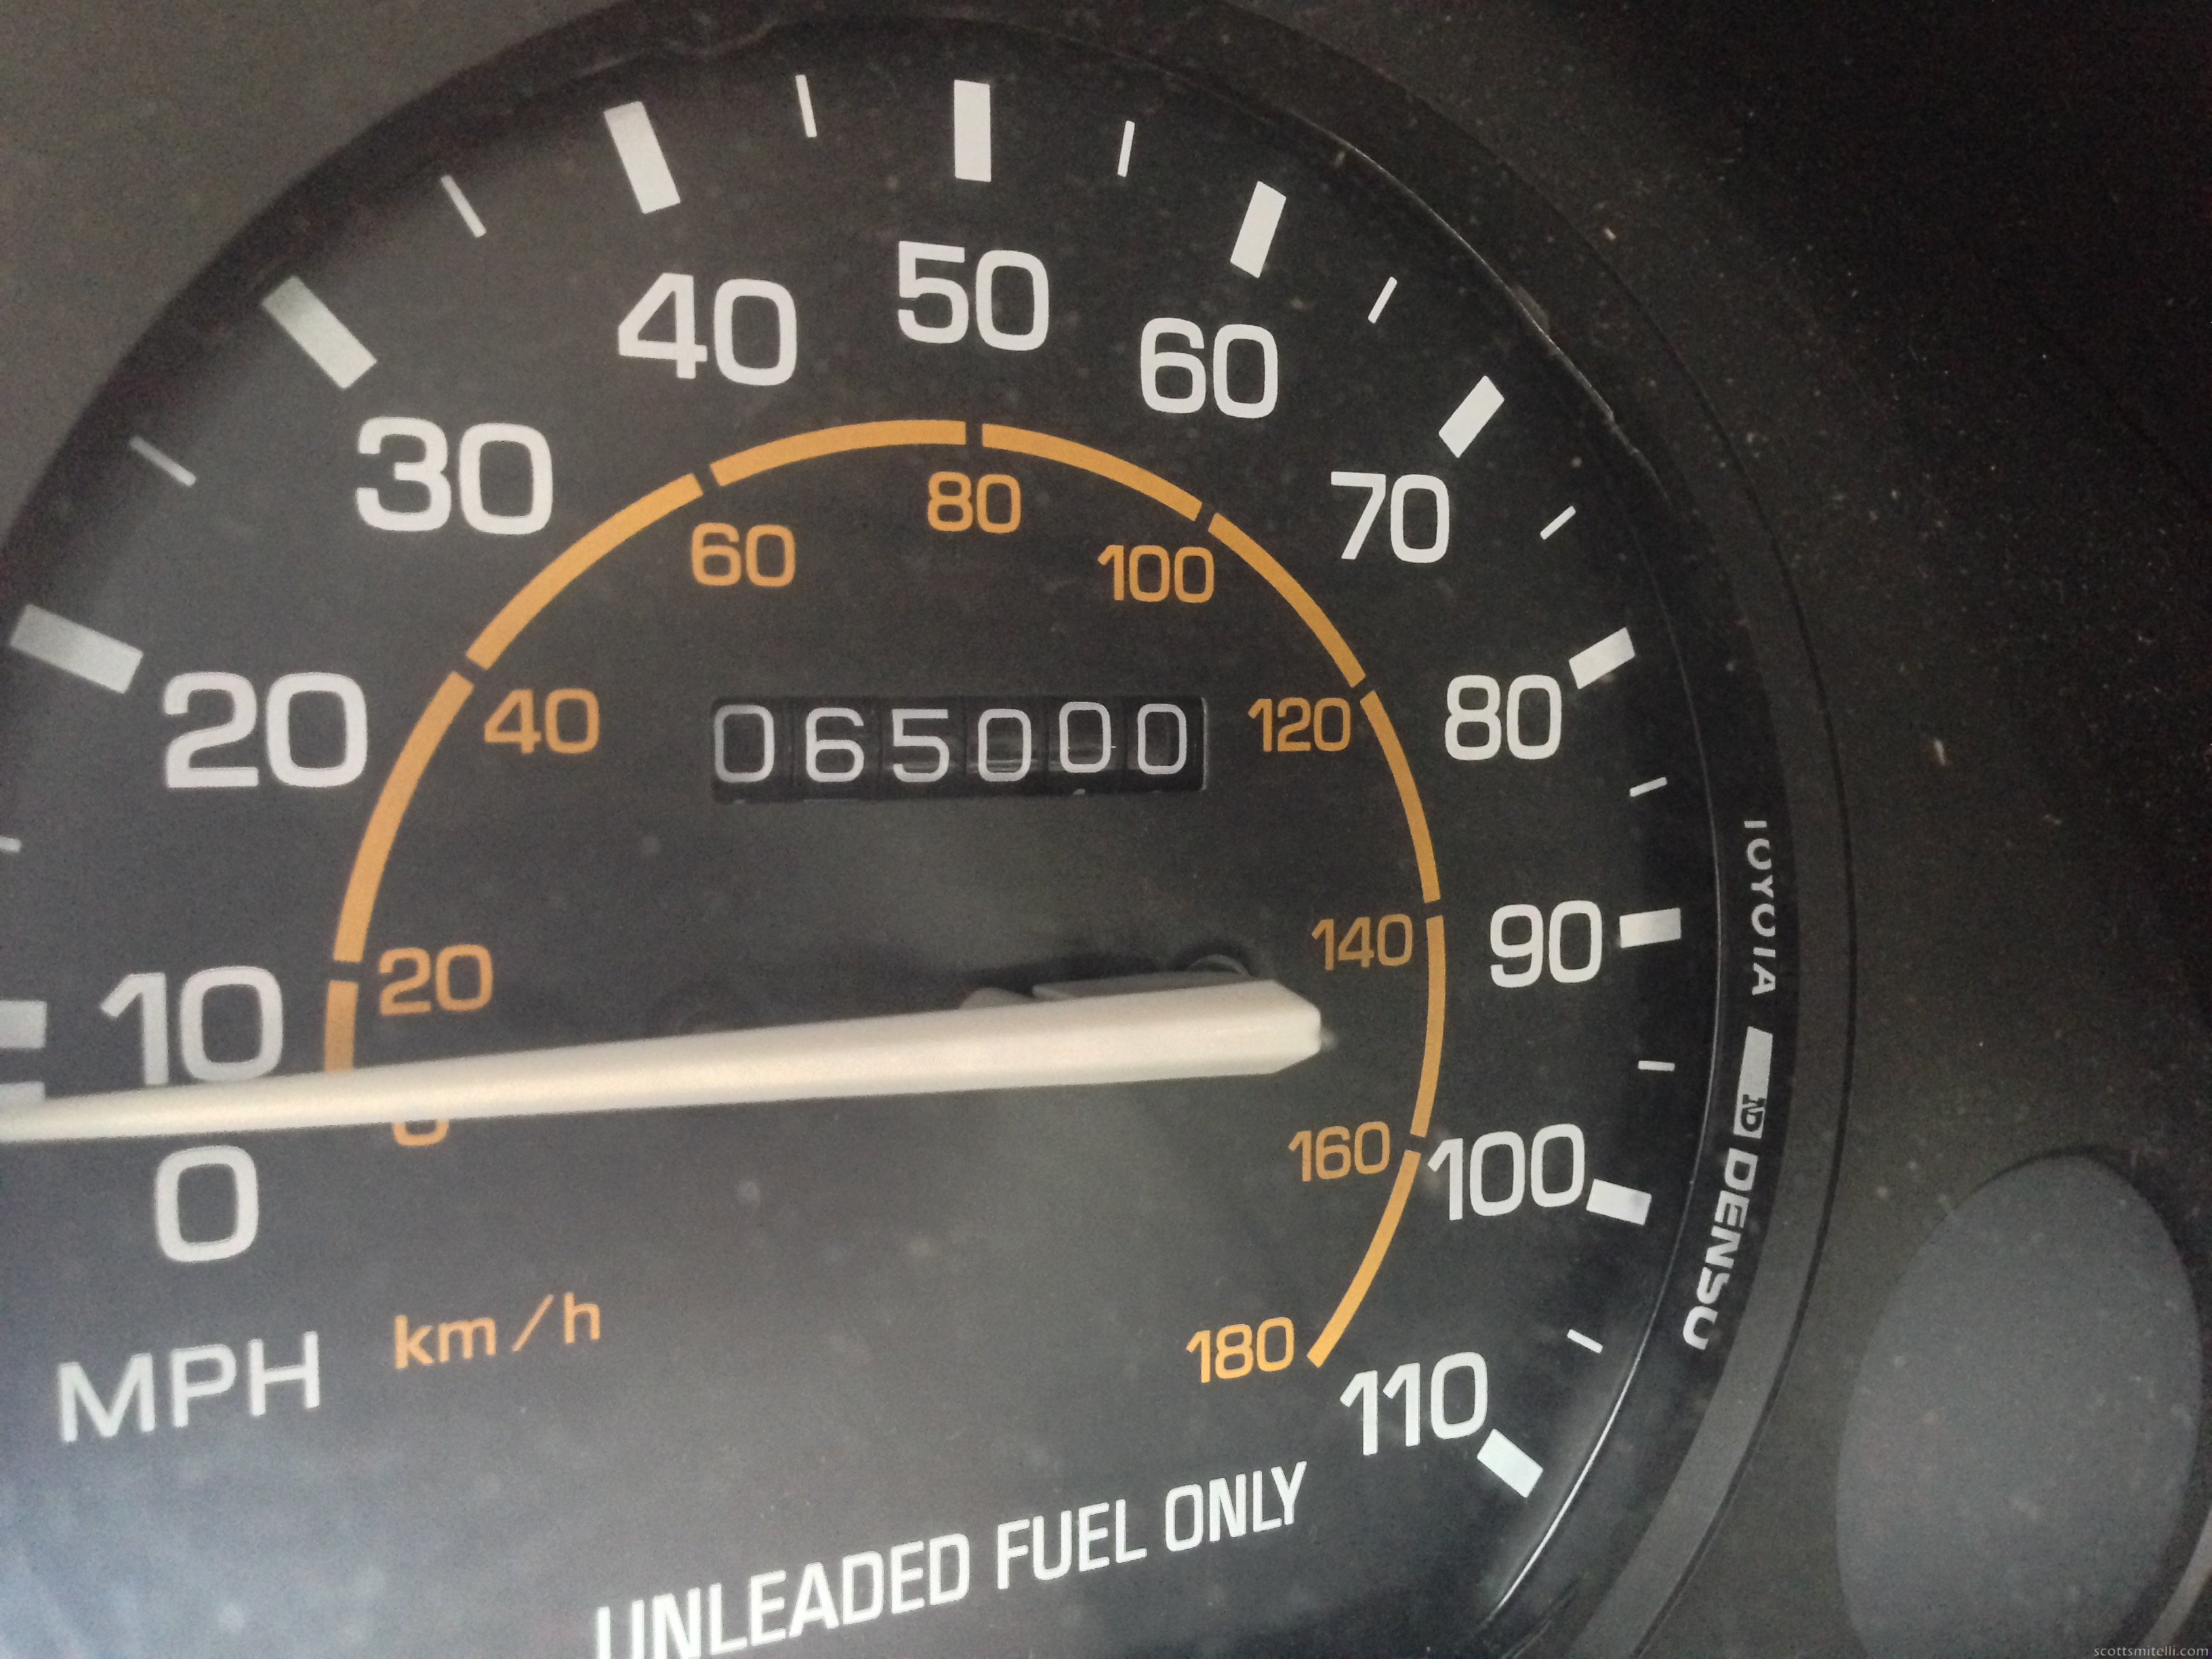 The roundest number it's reached since I've owned it.